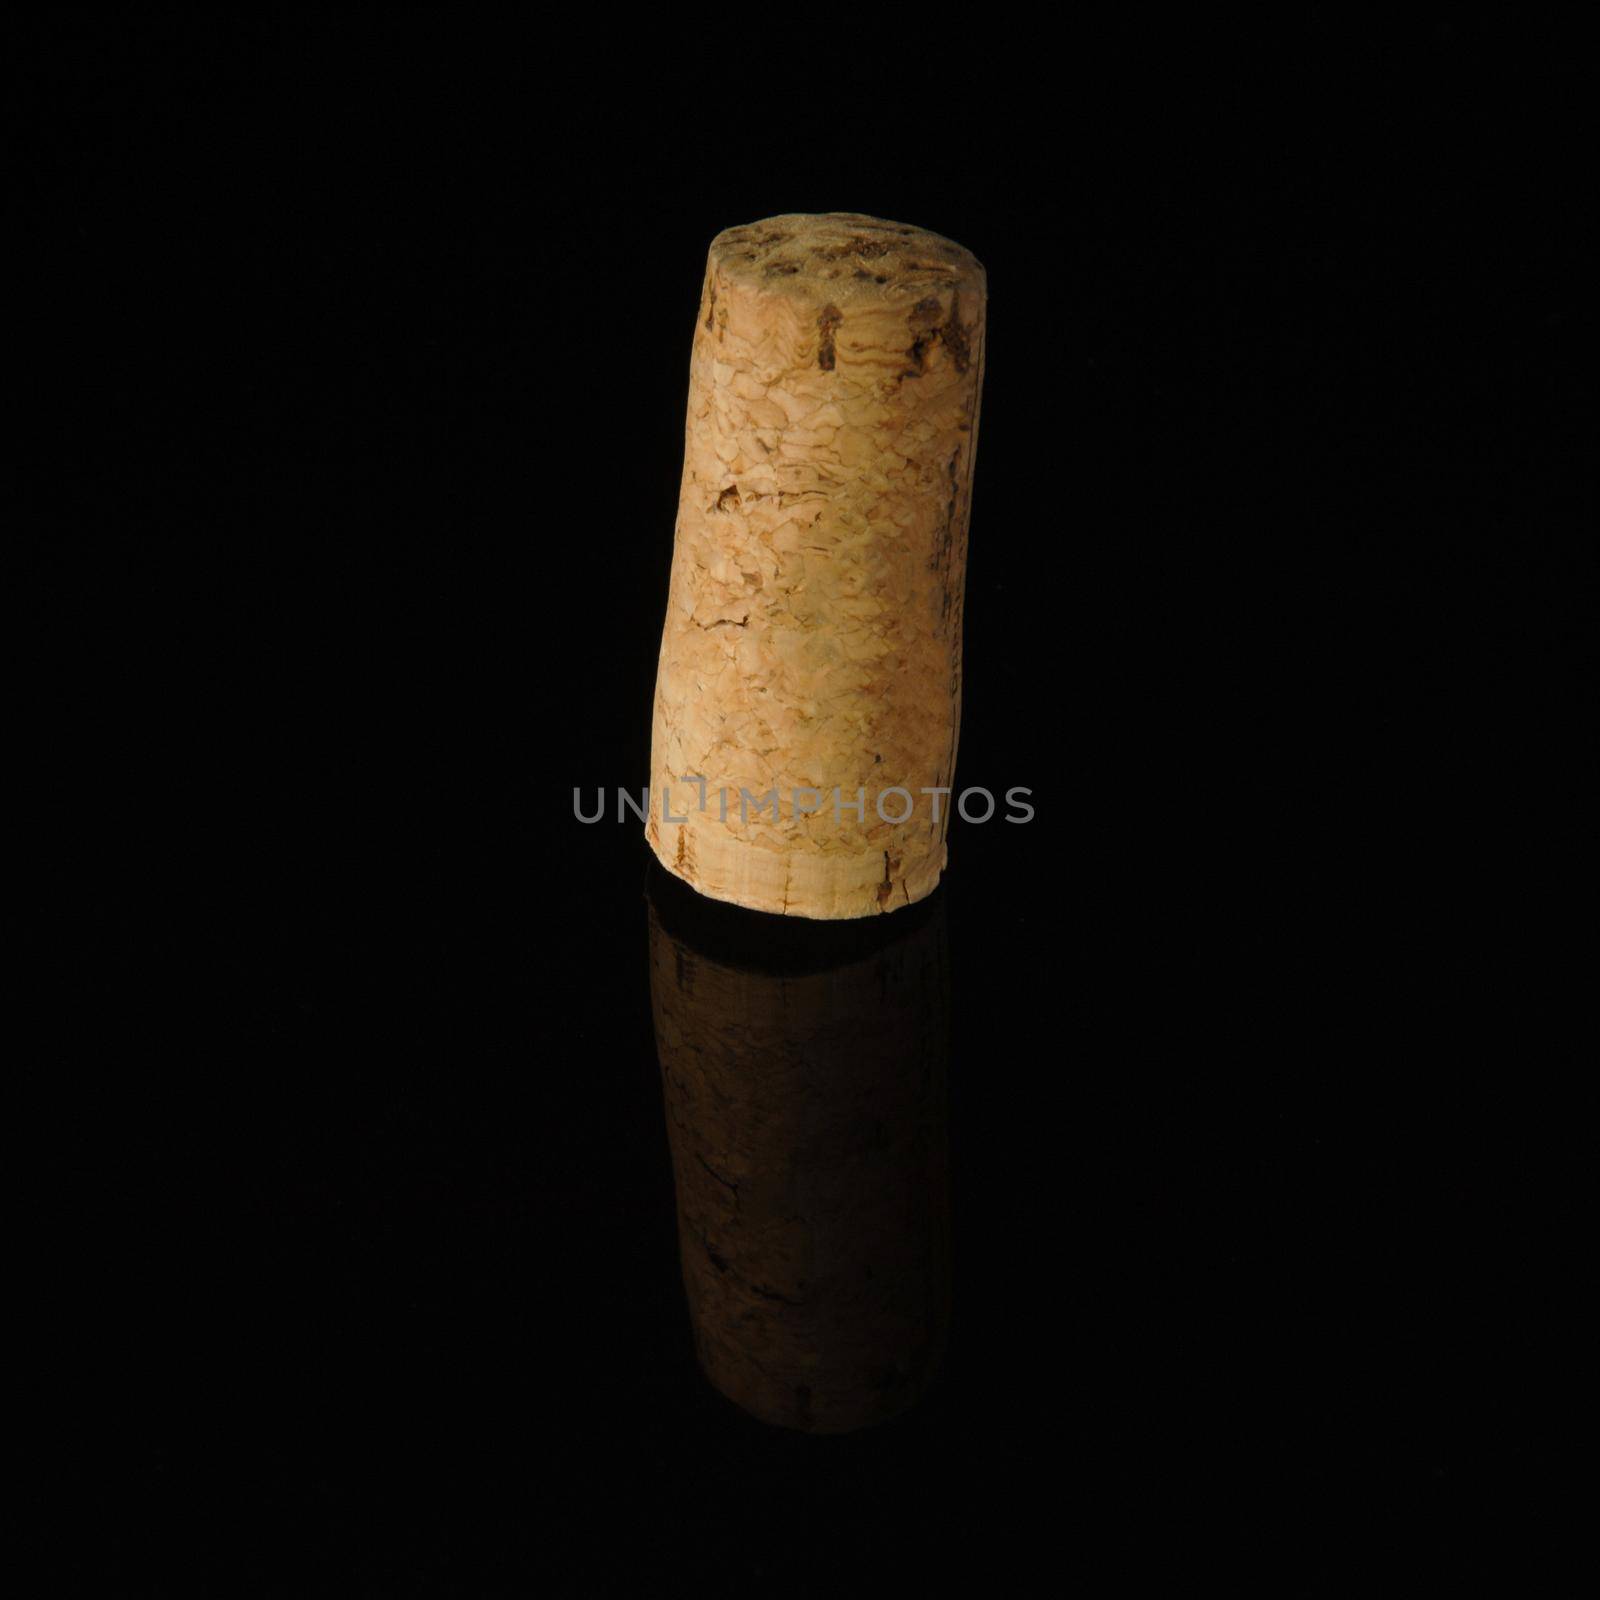 A close-up shot of a wine cork on a reflecting surface.